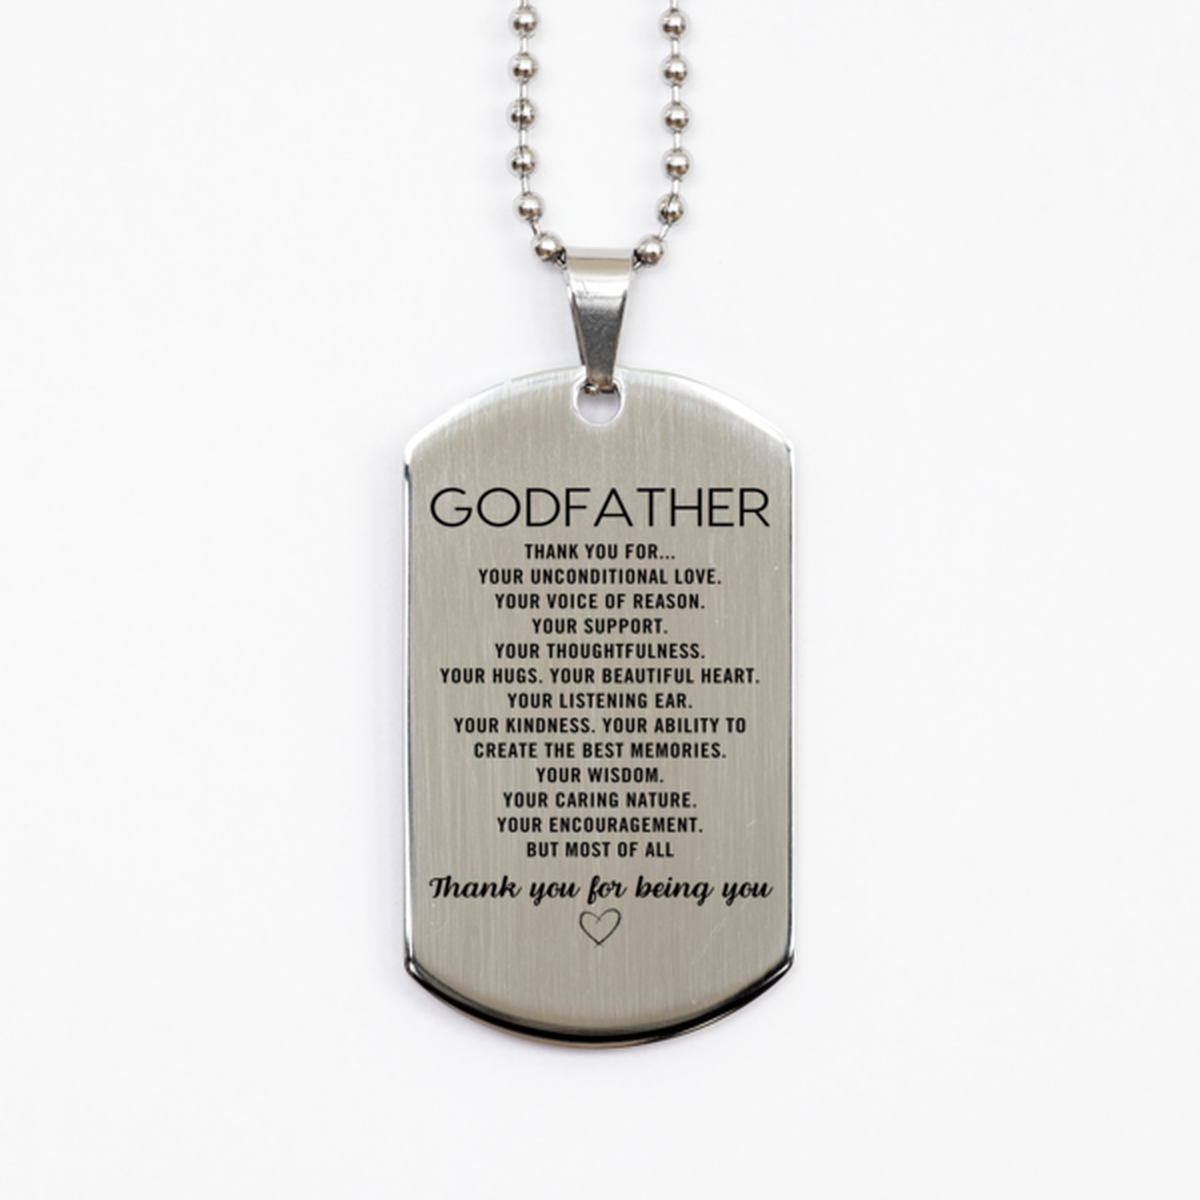 Godfather Silver Dog Tag Custom, Engraved Gifts For Godfather Christmas Graduation Birthday Gifts for Men Women Godfather Thank you for Your unconditional love